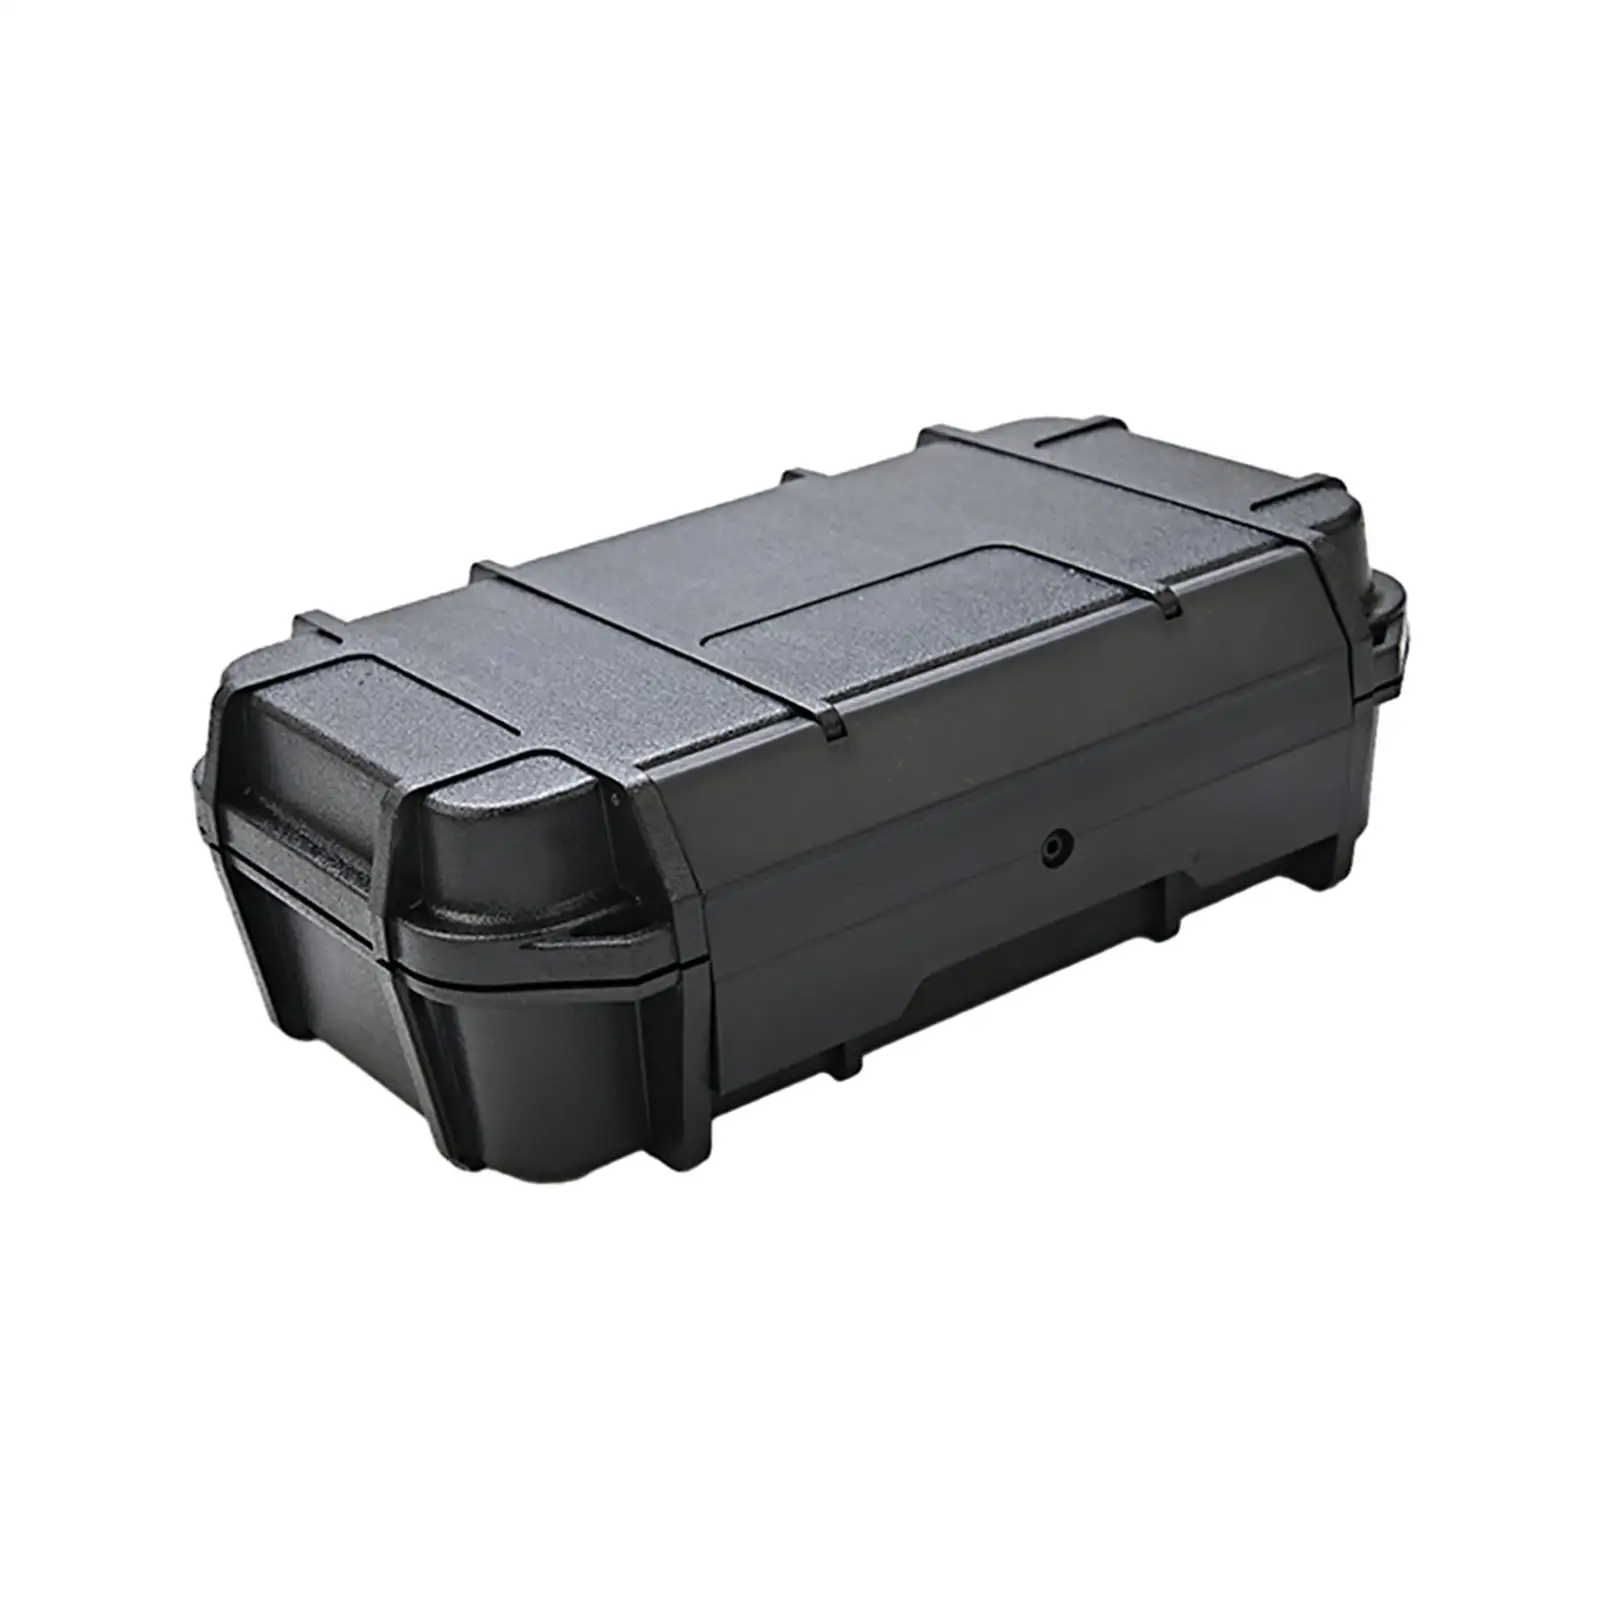 Tool Case Multipurpose Waterproof Storage Container for Small Electronics Equipment Tools Repair Tool Accessories Tools Parts